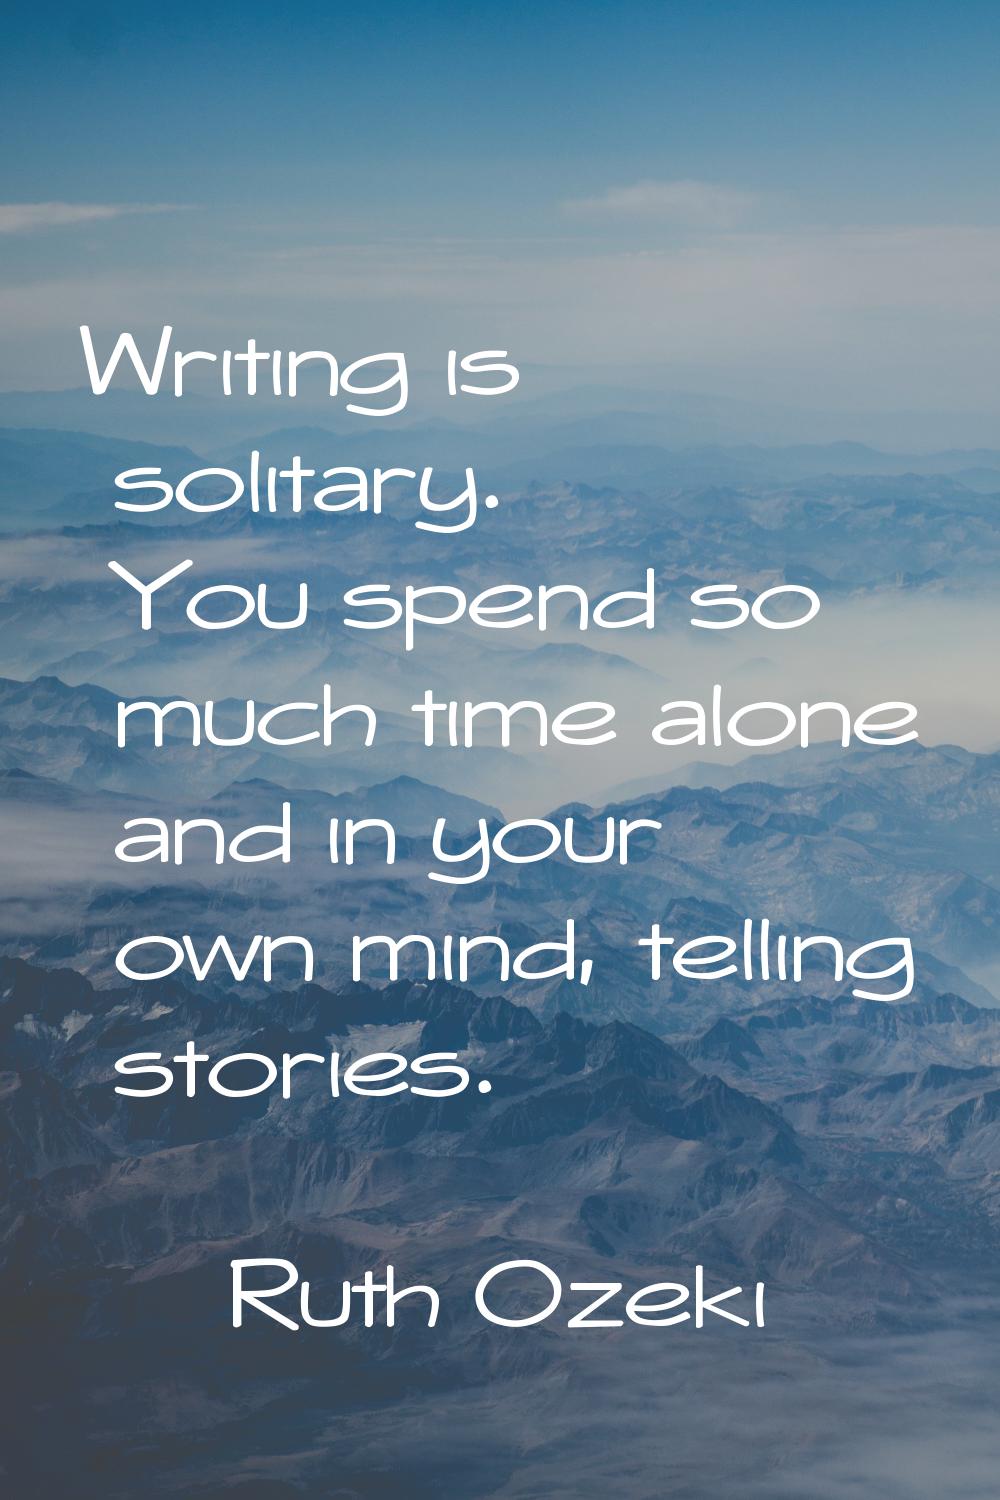 Writing is solitary. You spend so much time alone and in your own mind, telling stories.